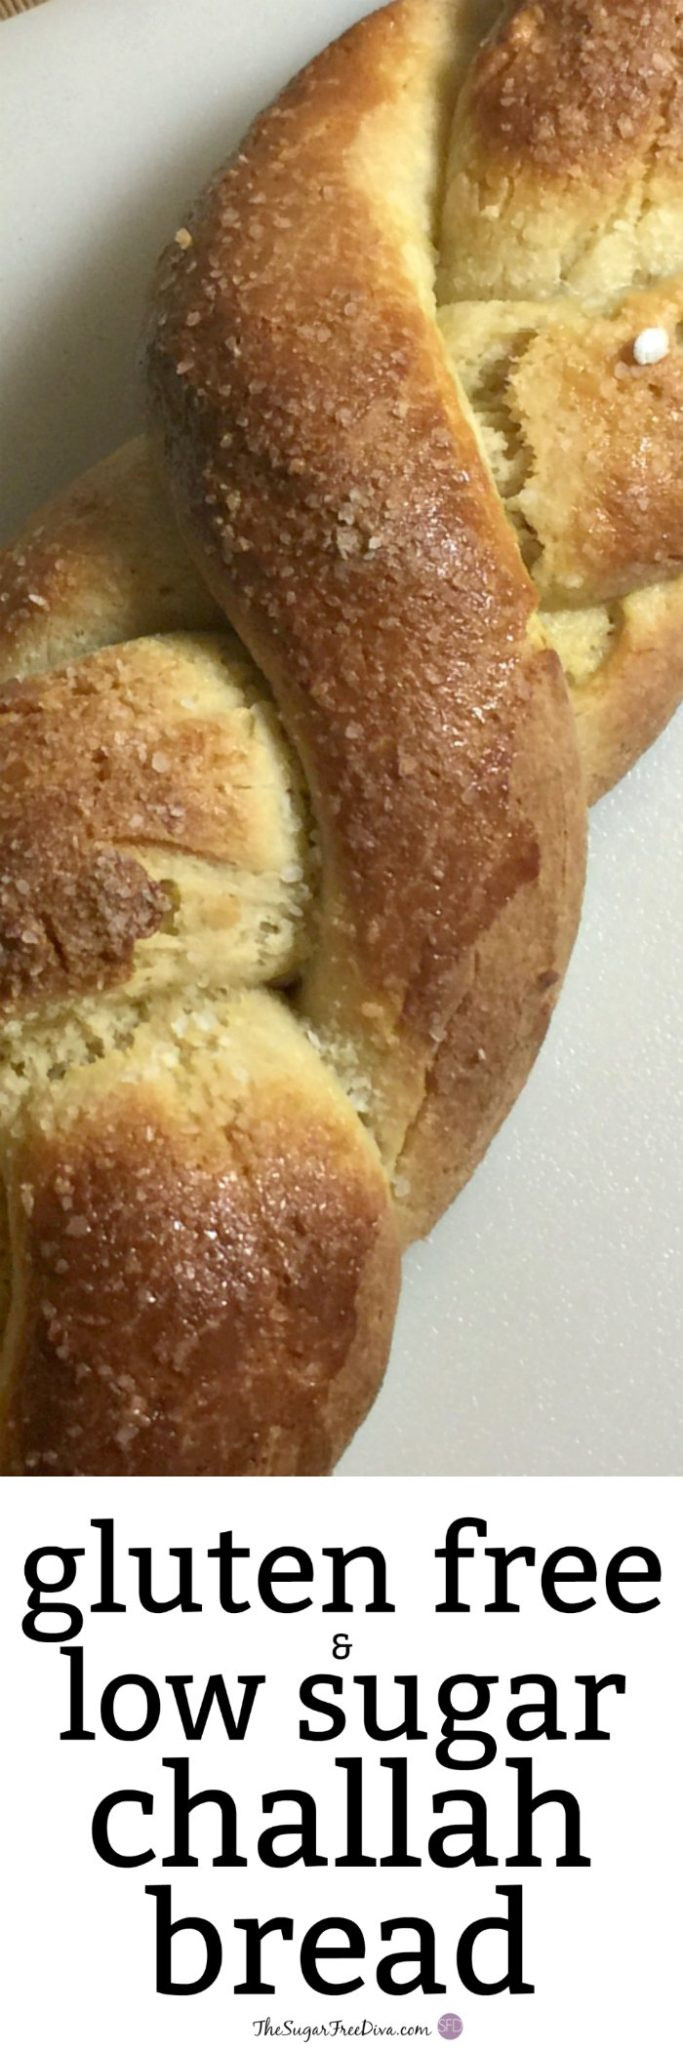 Gluten Free Challah Bread
 It is possible to make a Gluten Free and Low Sugar Challah